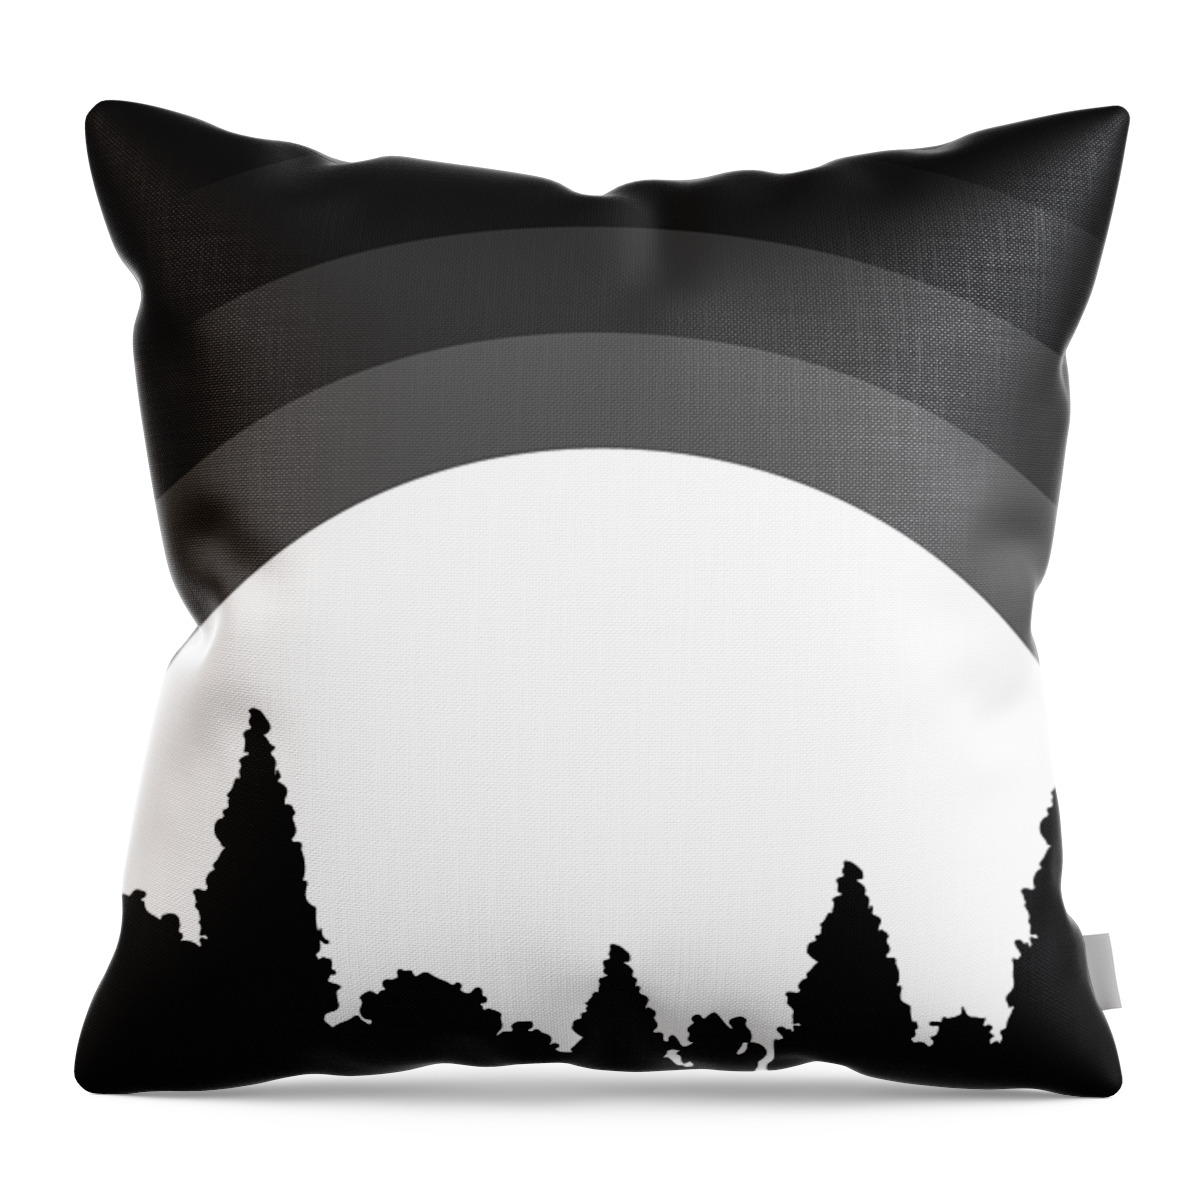 Glow Throw Pillow featuring the digital art Full Moon Trees Silhouette by Pelo Blanco Photo